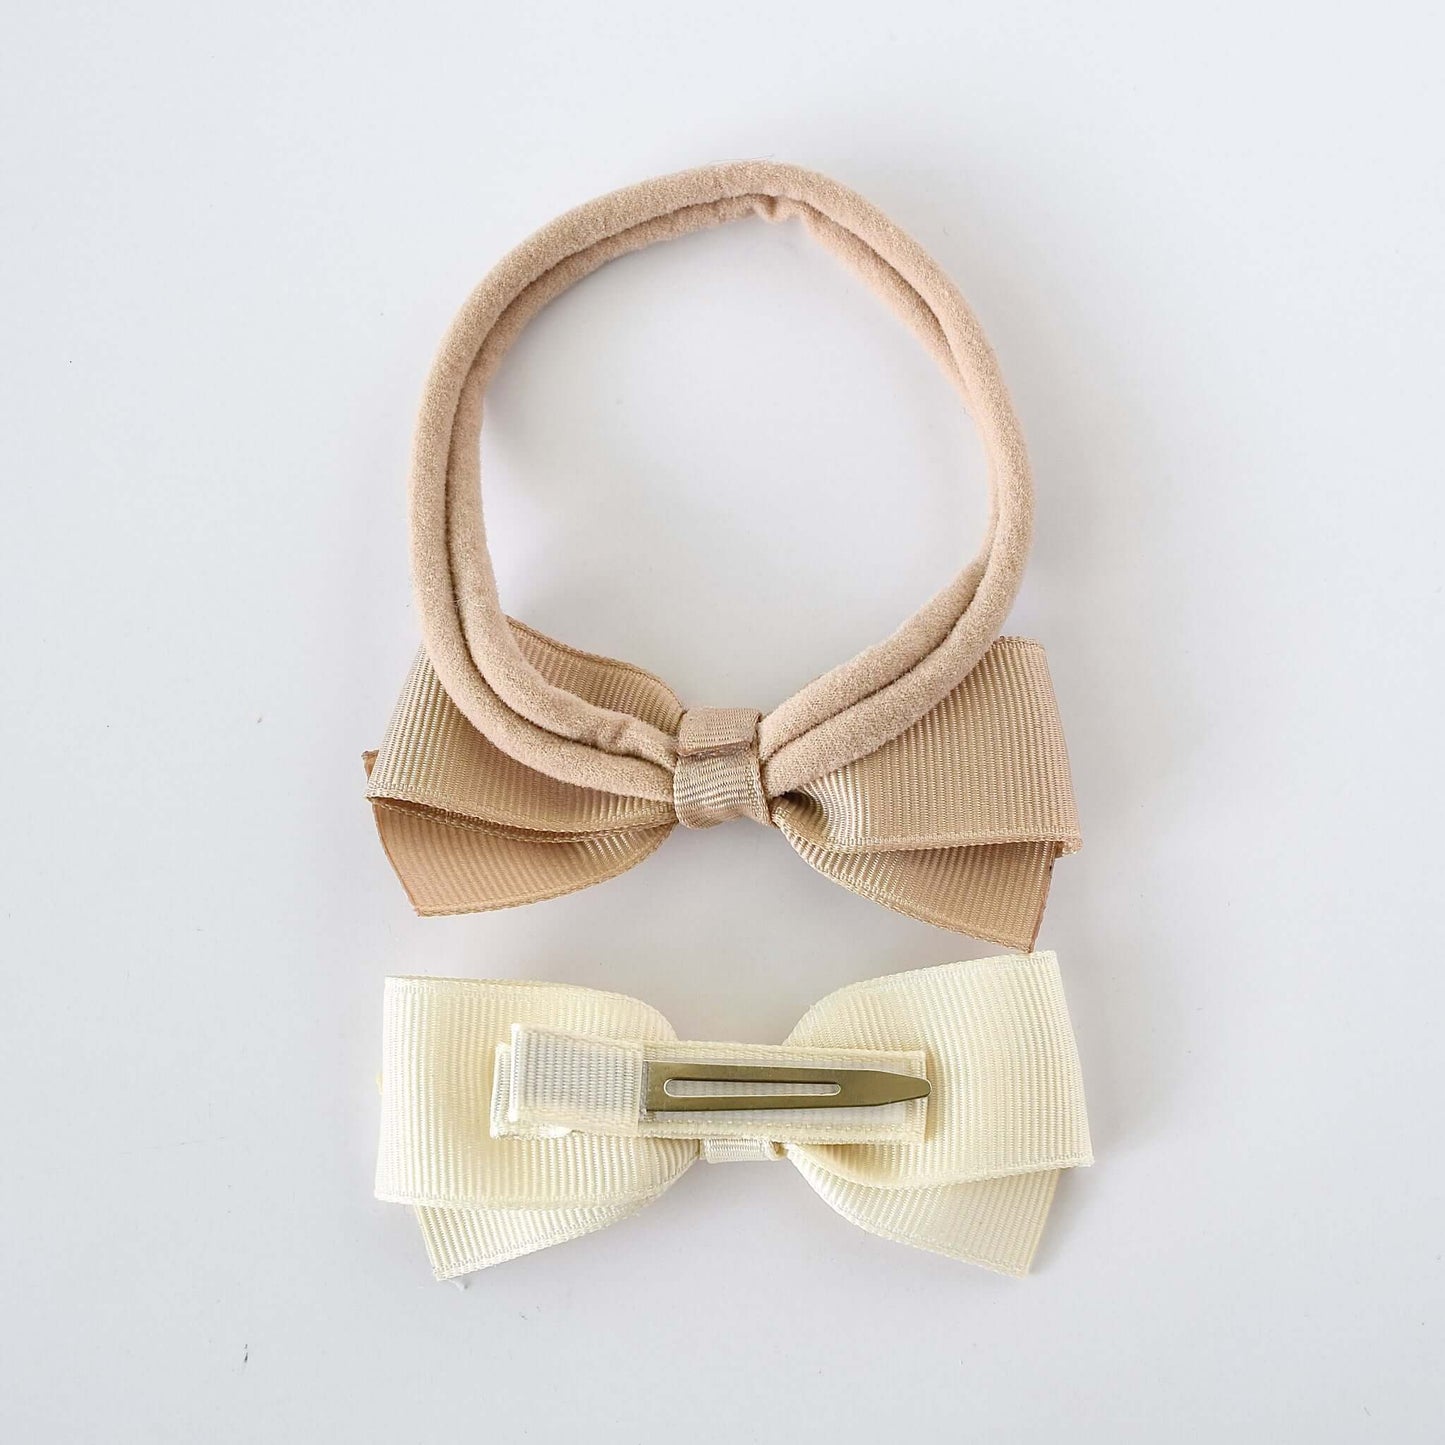 Nude nylon headband with a beige grosgrain bow and yellow grosgrain bow clip with no-slip grip for babies and young girls